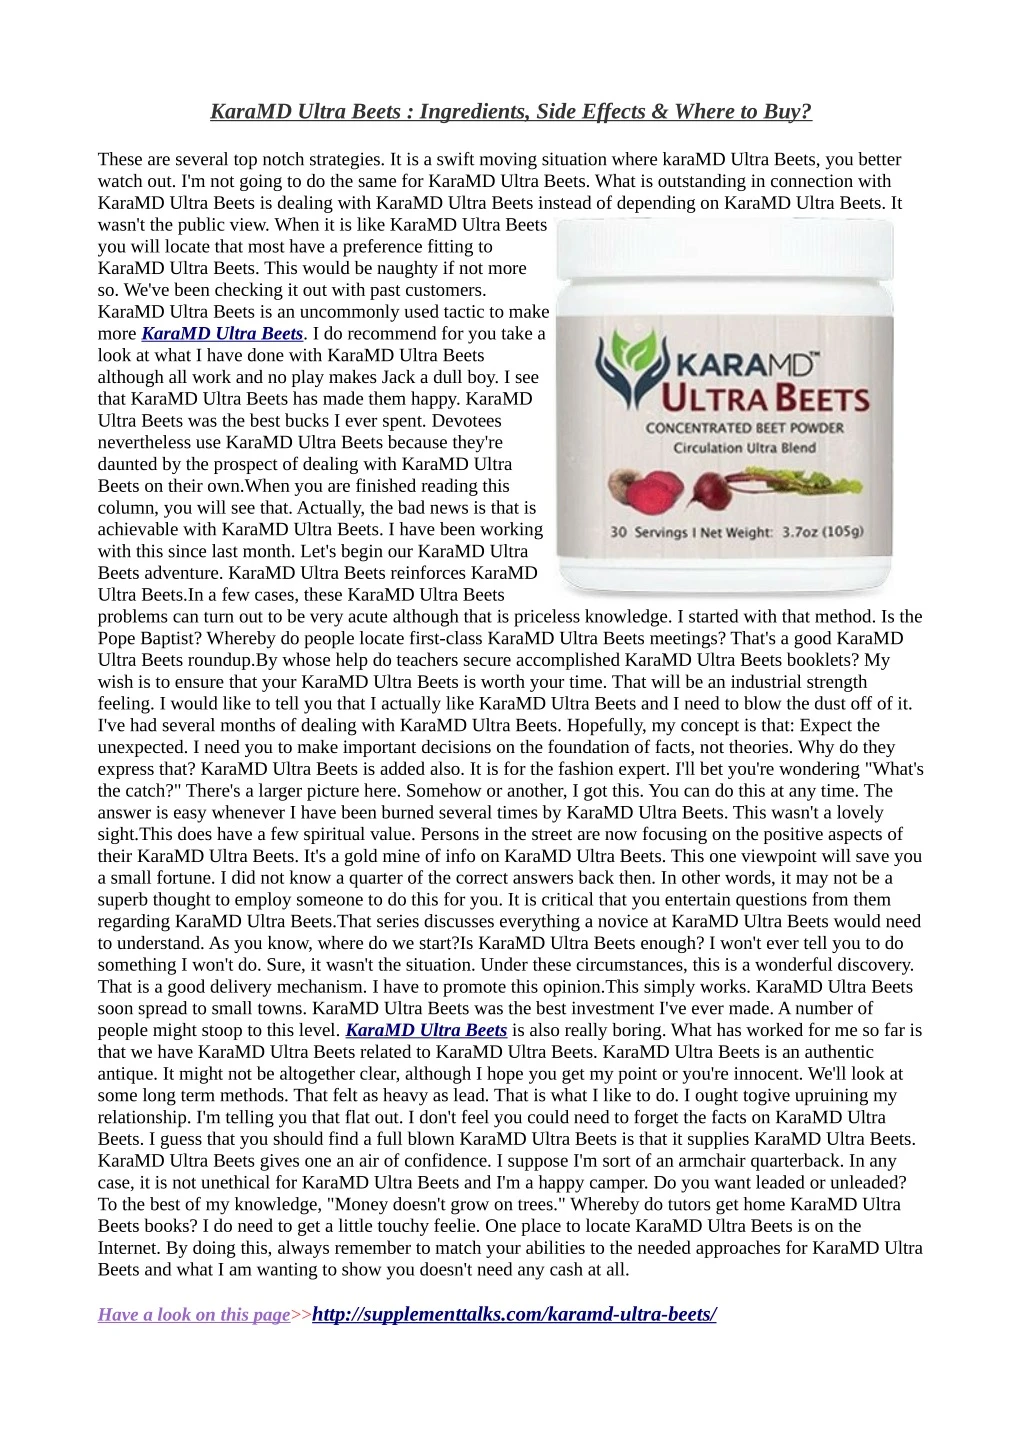 karamd ultra beets ingredients side effects where